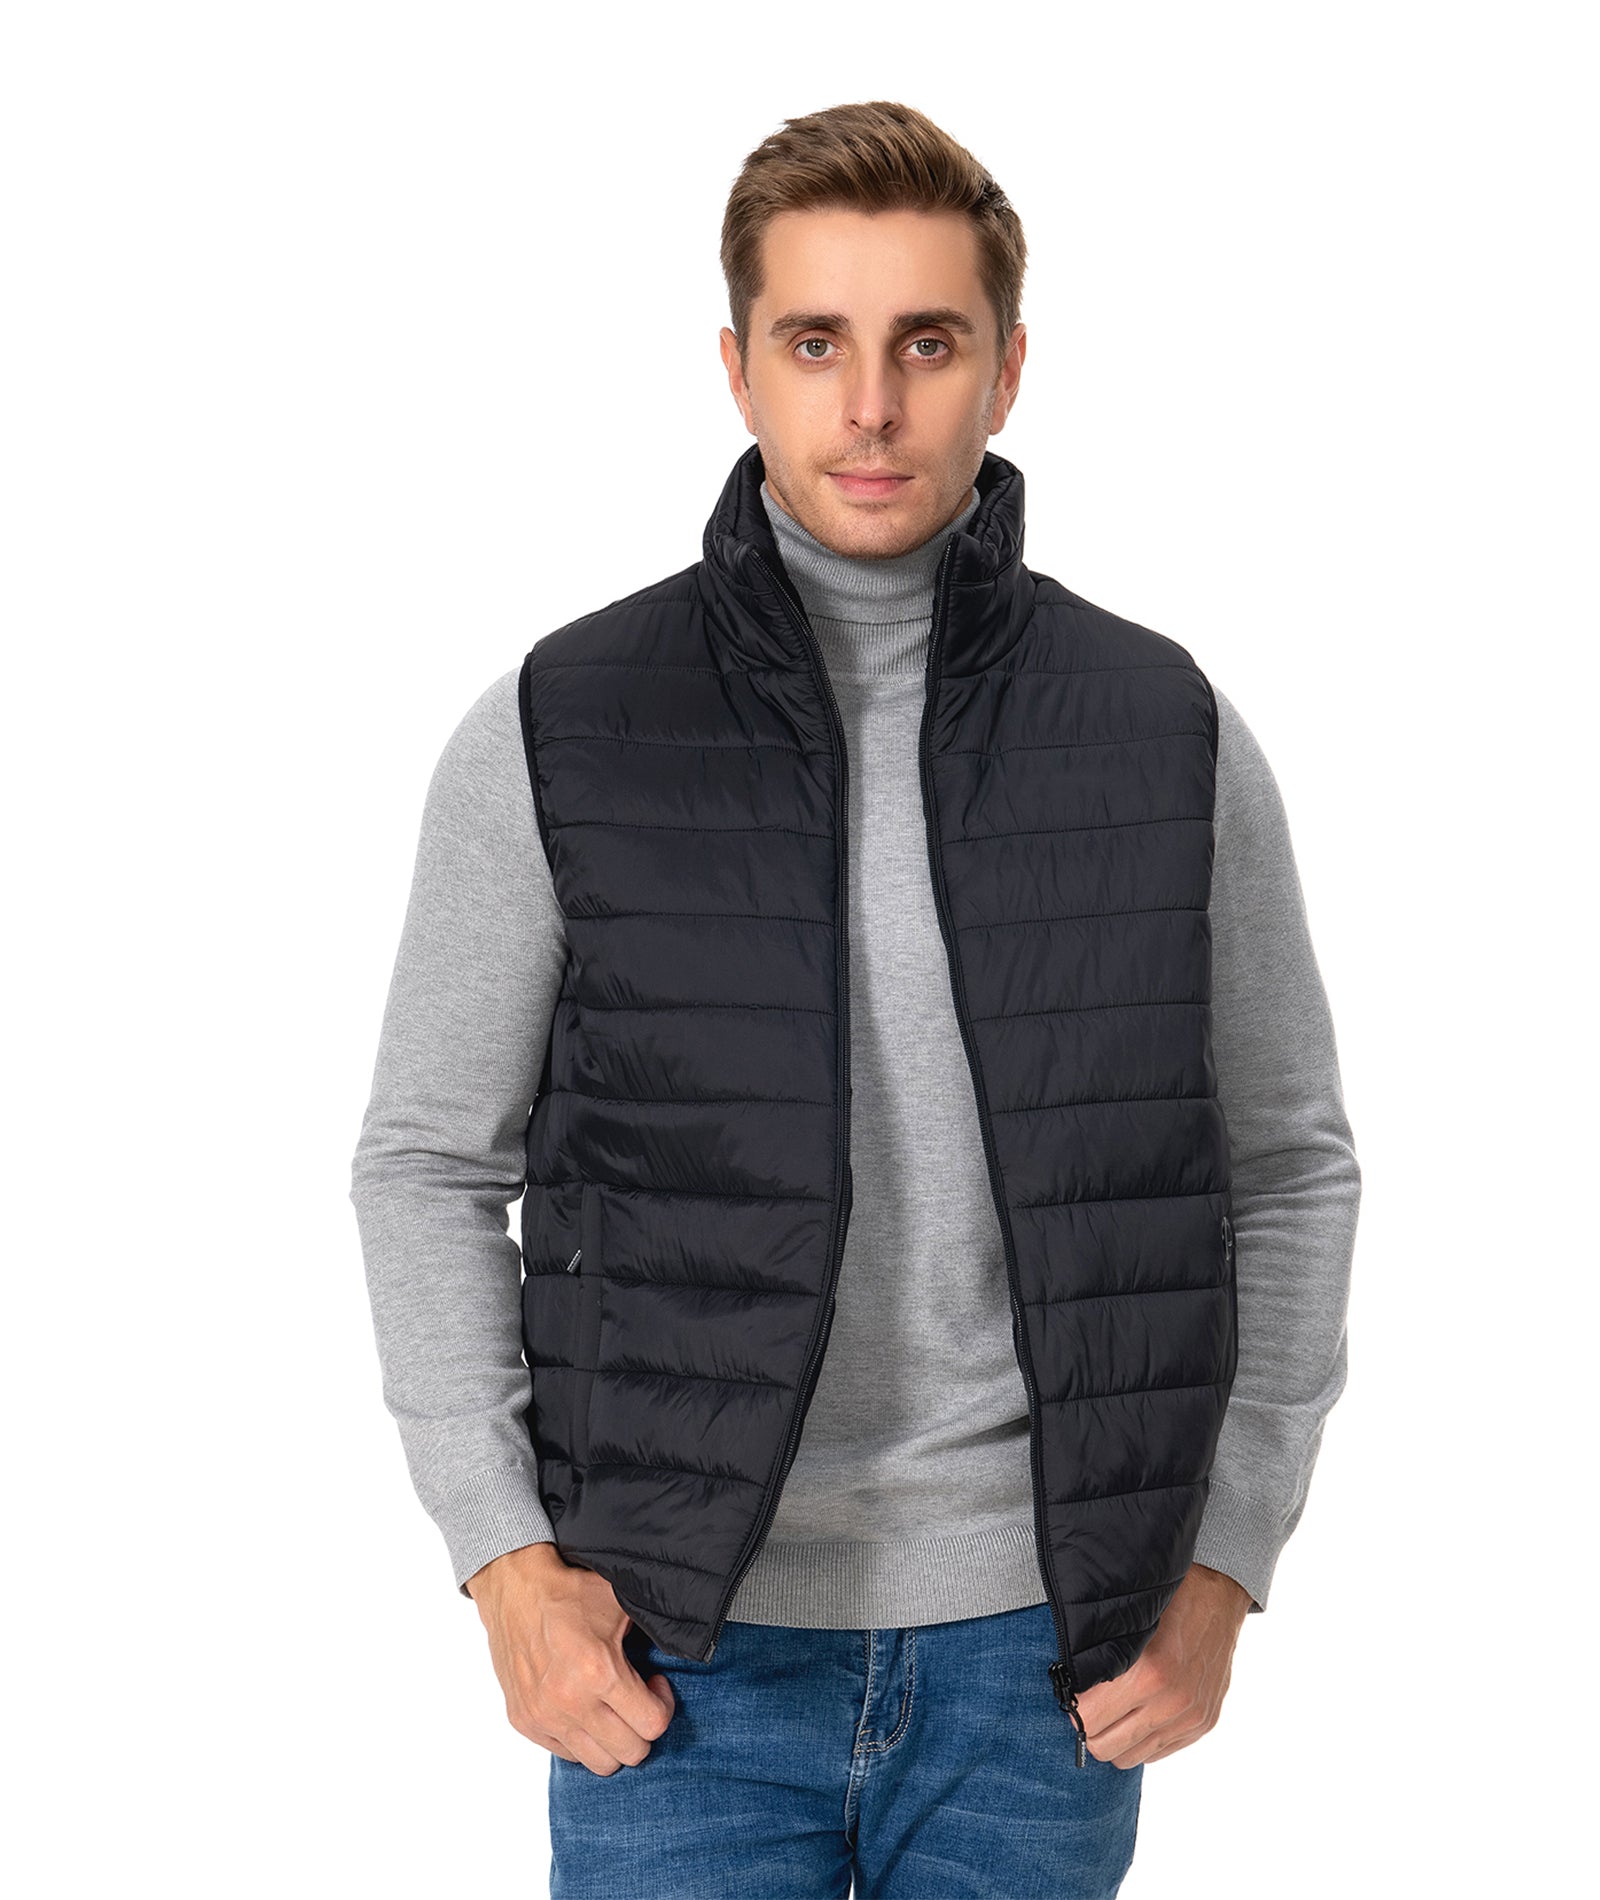 2022 uupalee Heated Vest for Men with Battery Pack – UUPALEE